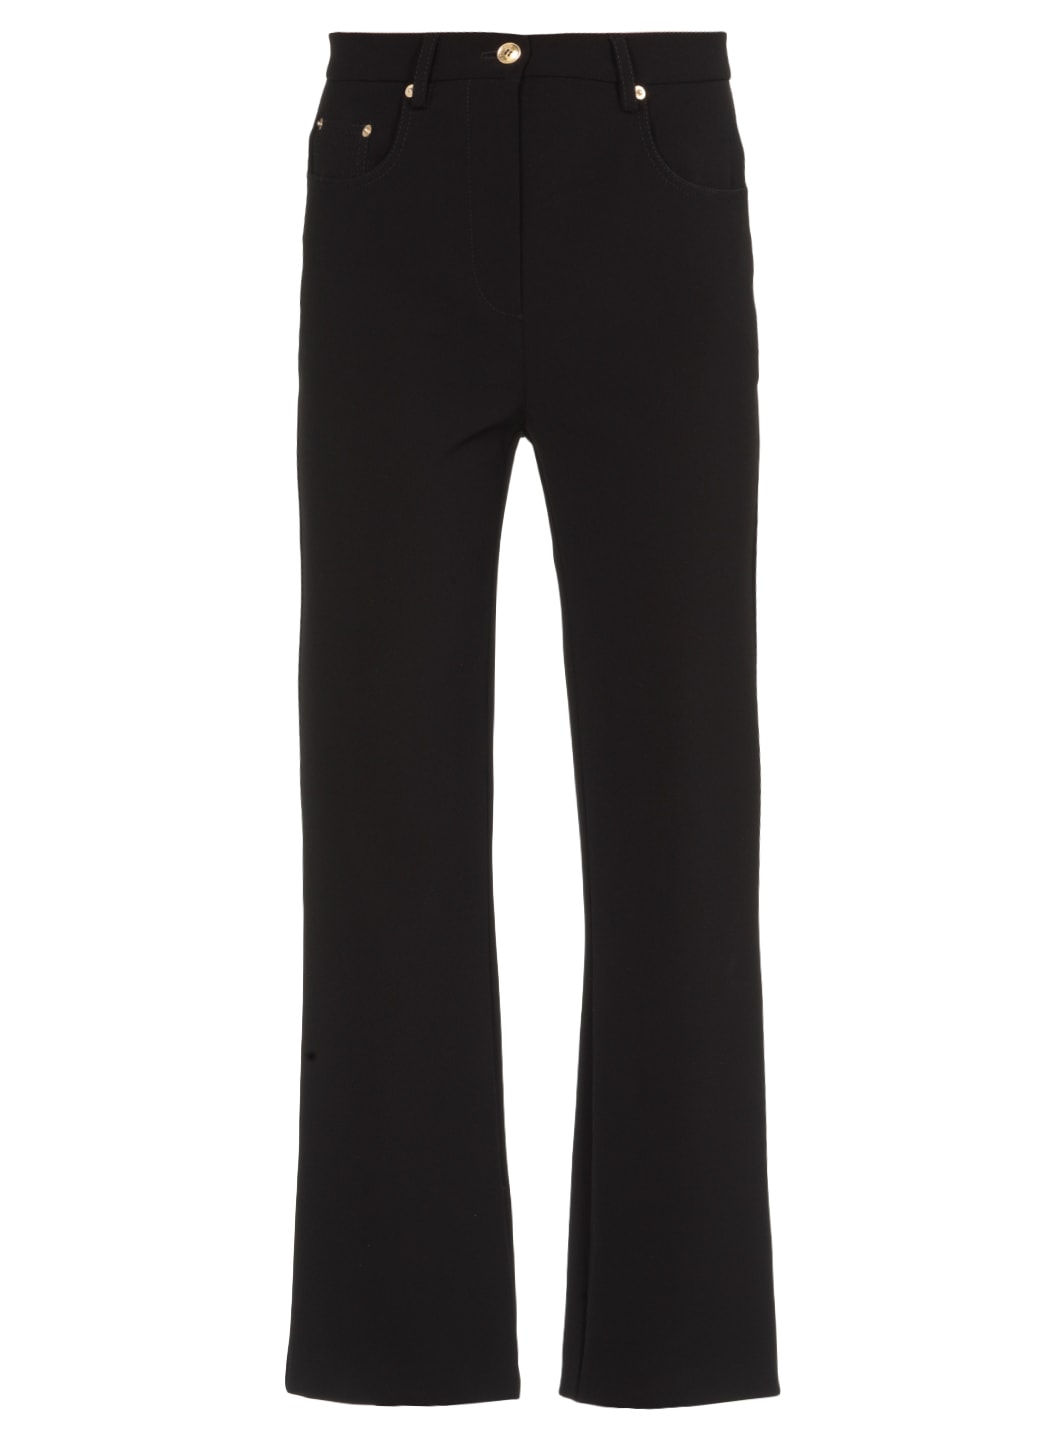 Boutique Moschino Stretch Fabric Pant In Black